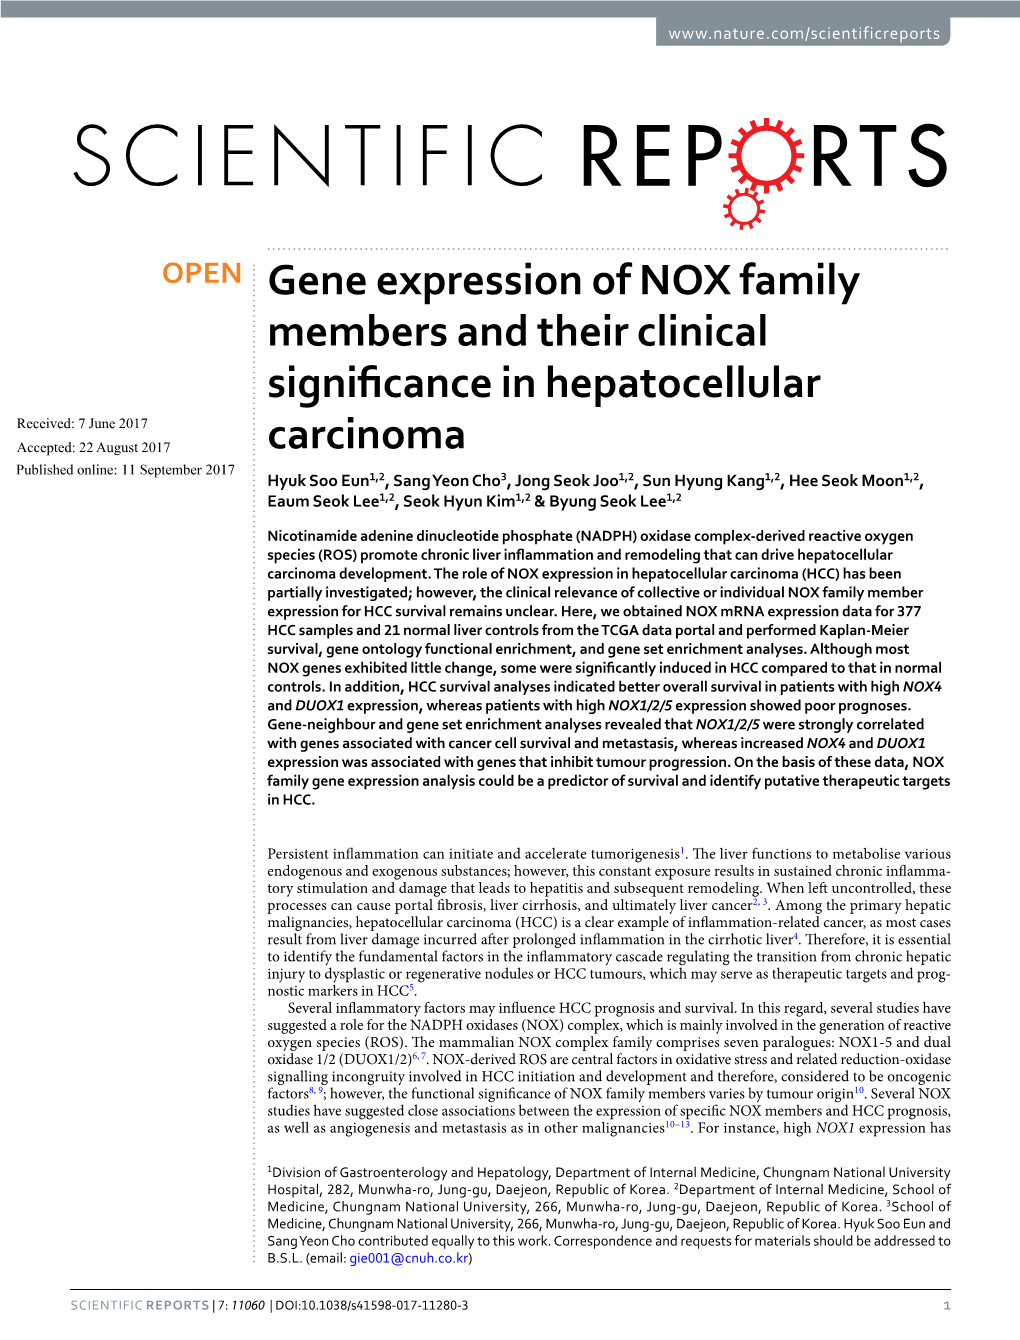 Gene Expression of NOX Family Members and Their Clinical